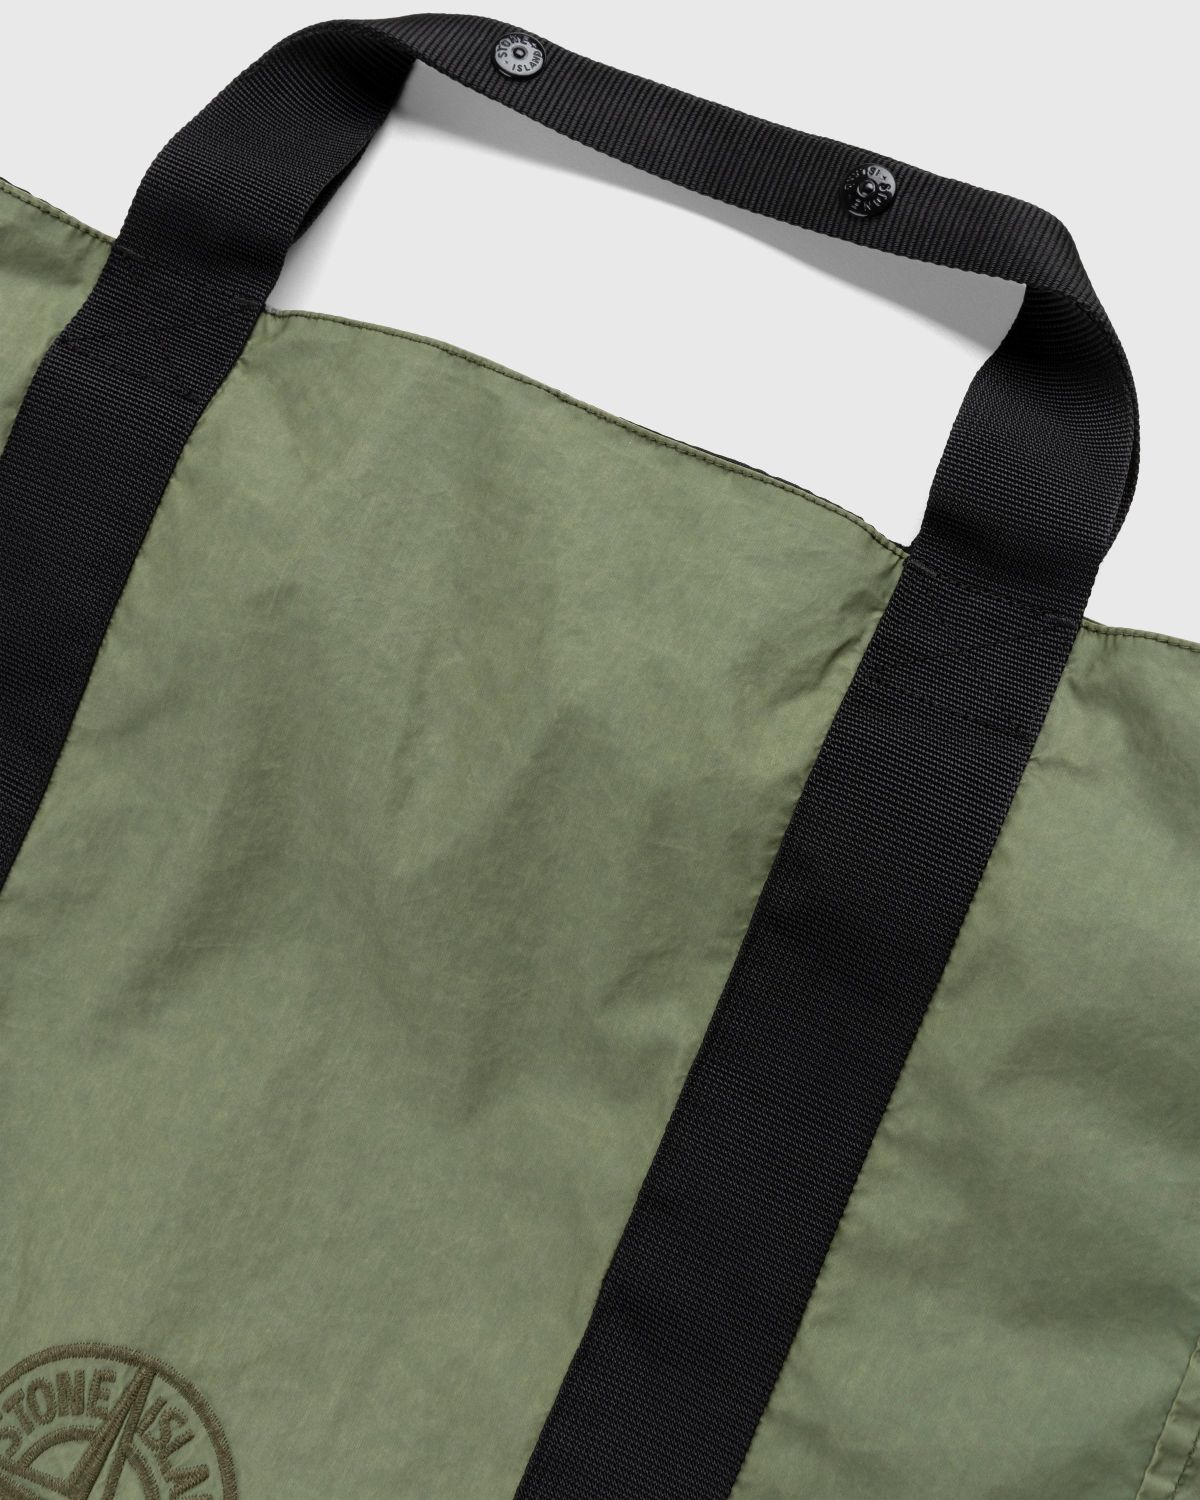 Stone Island – 91475 Garment-Dyed Tote Bag Olive - Bags - Green - Image 4